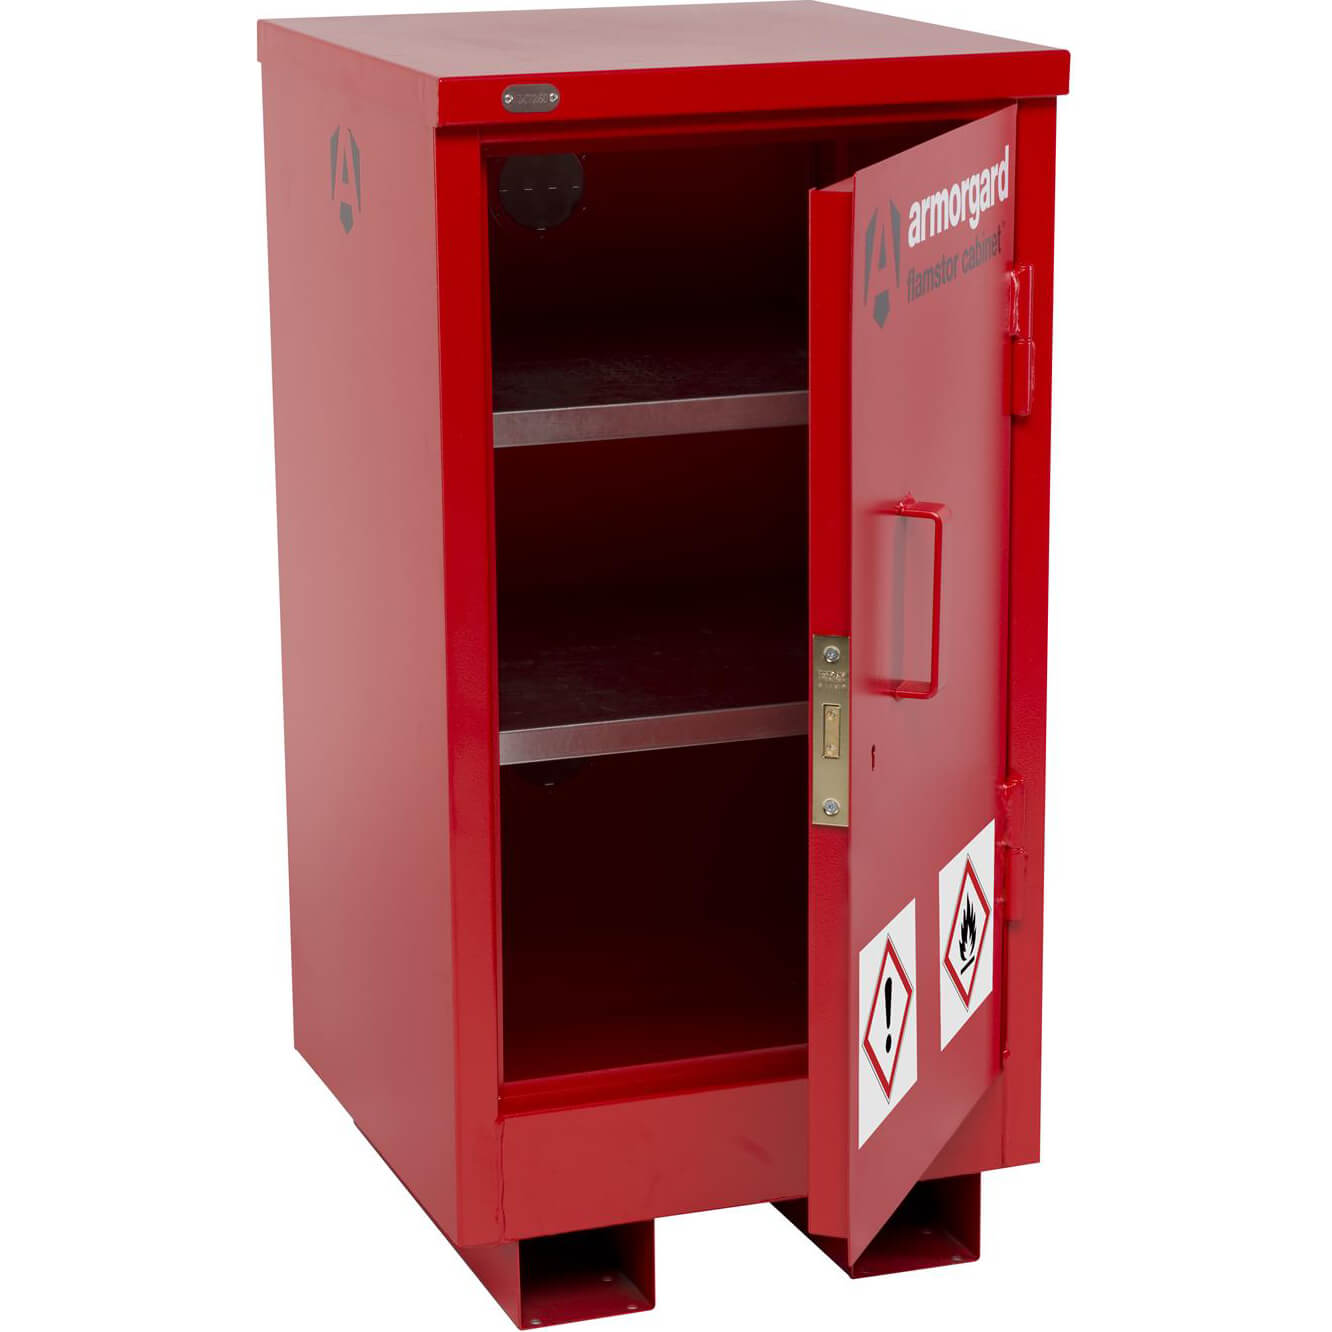 Photo of Armorgard Flamstor Chemical And Flammables Hazardous Cabinet 1350mm 780mm 1560mm